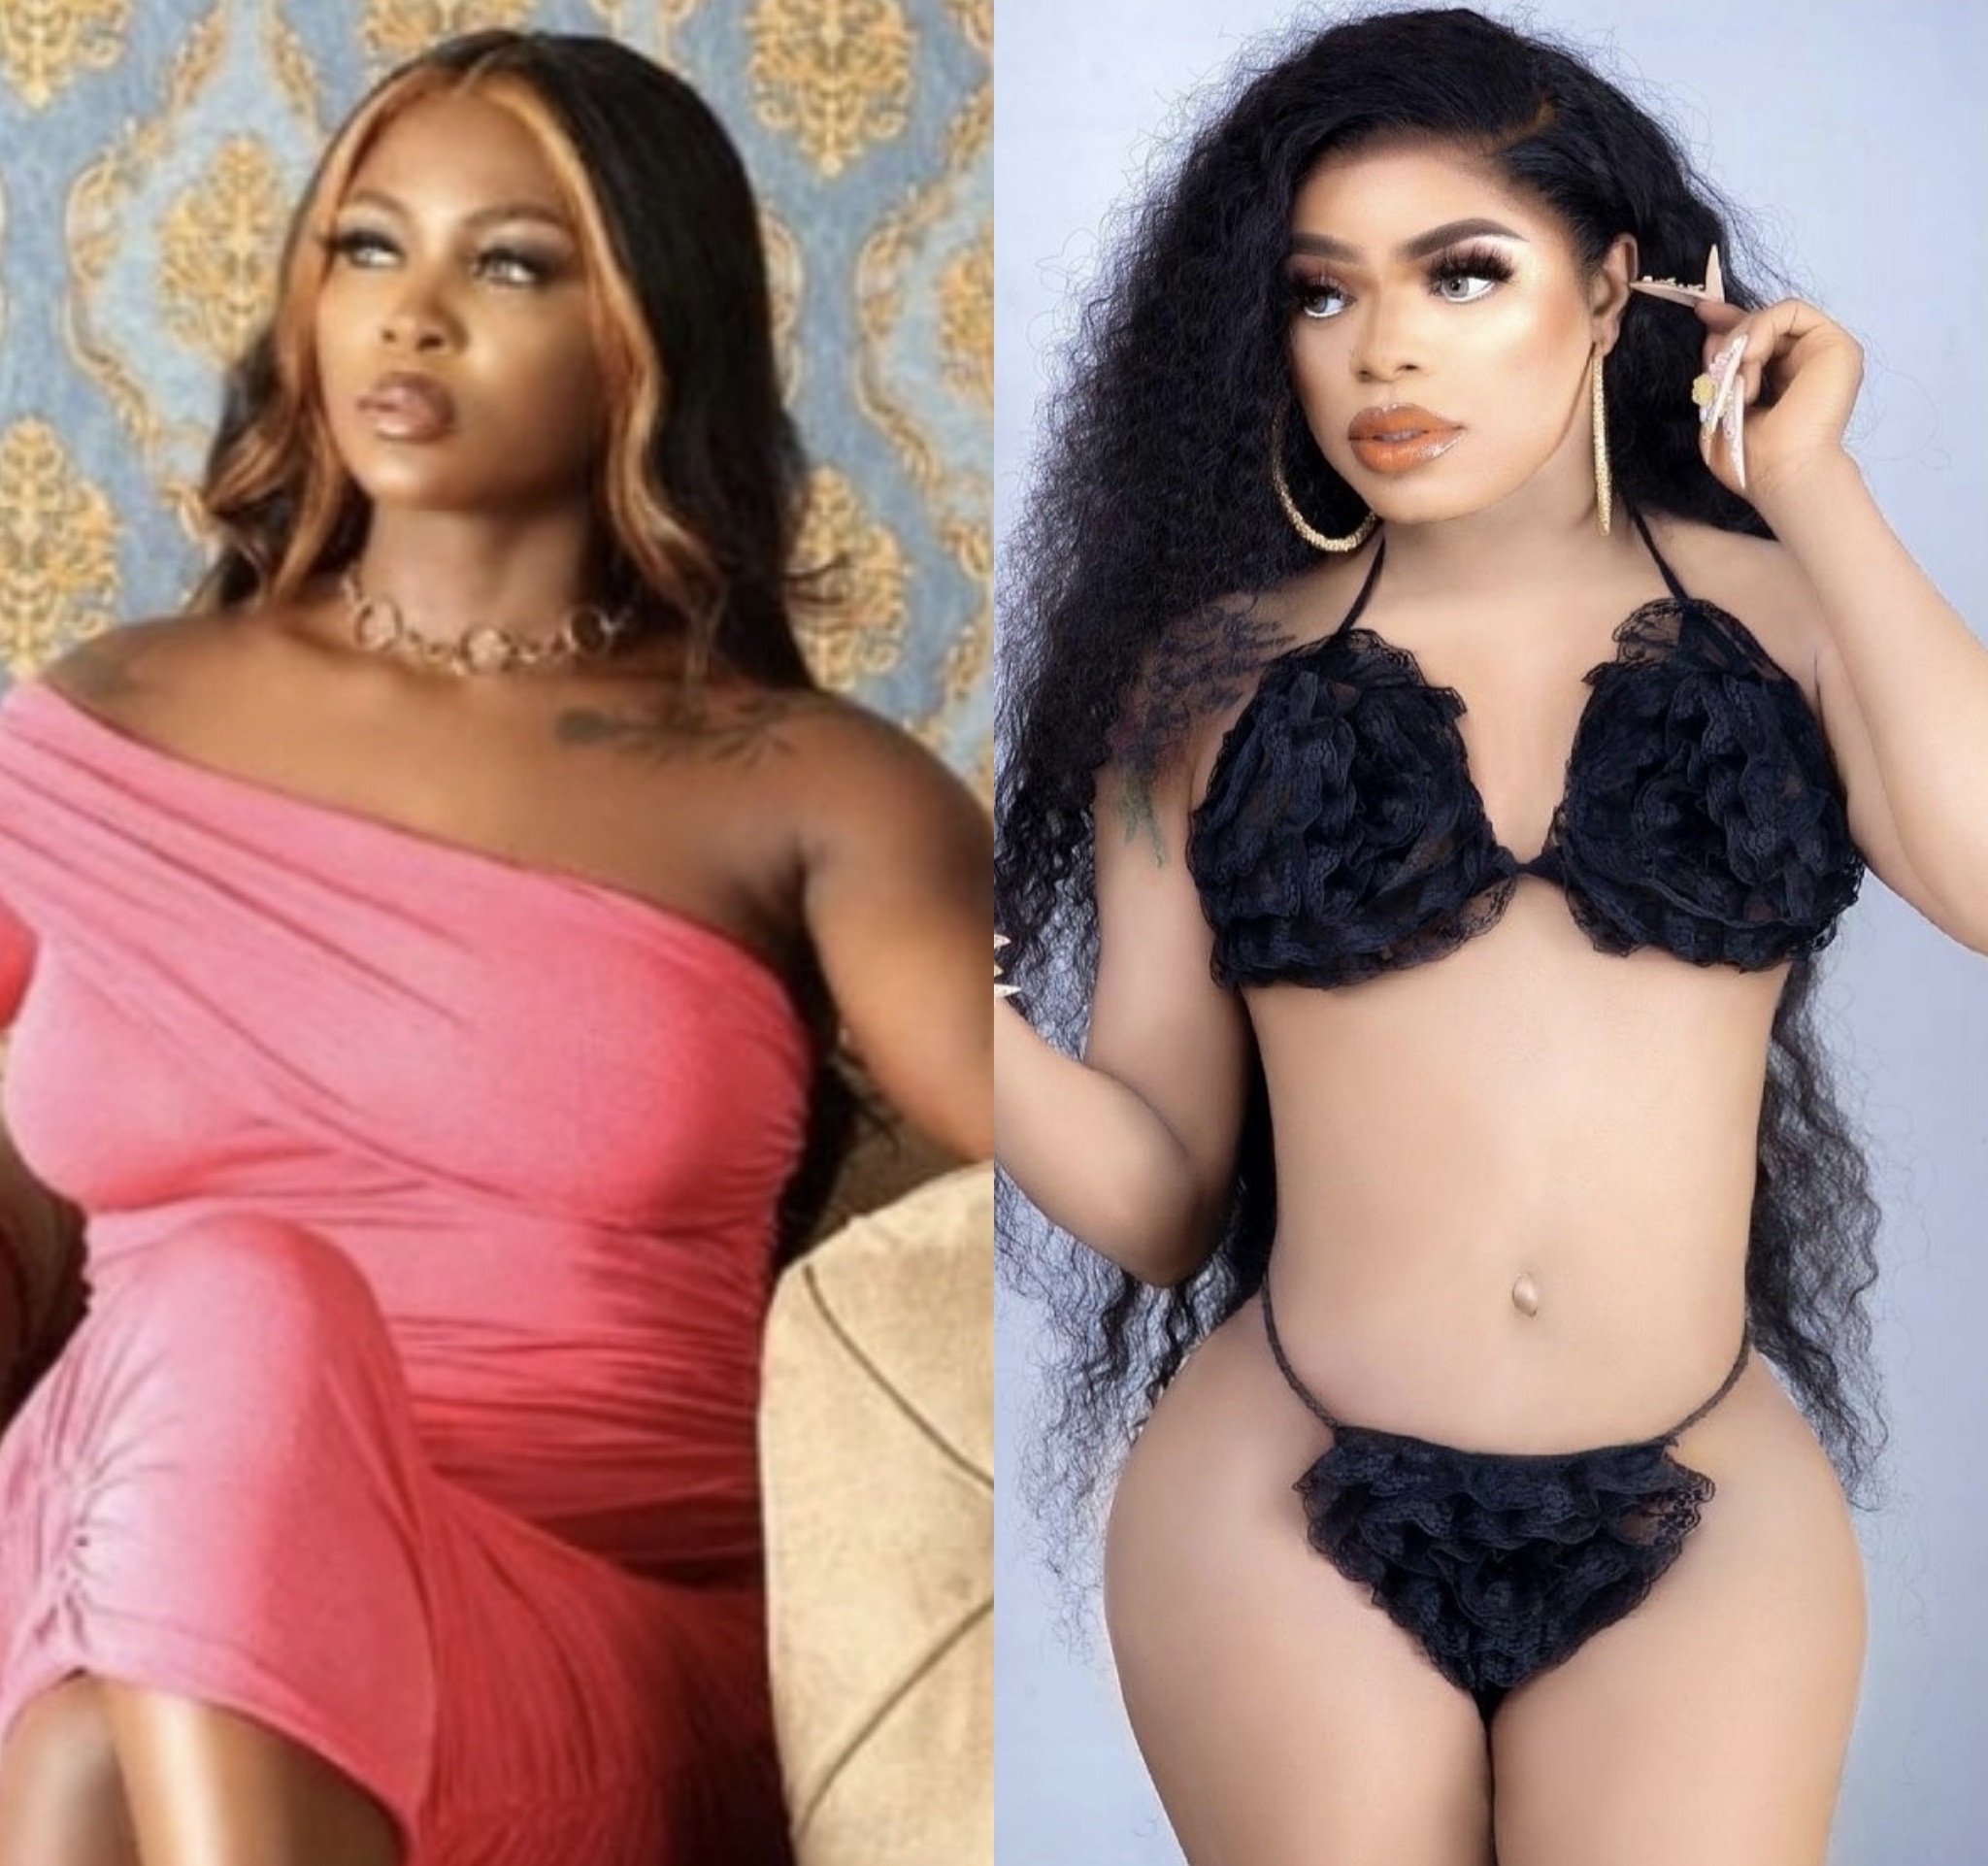 Is gay now legal in Nigeria – BBNaija’s Ka3na drops shade after new photos of Bobrisky went viral